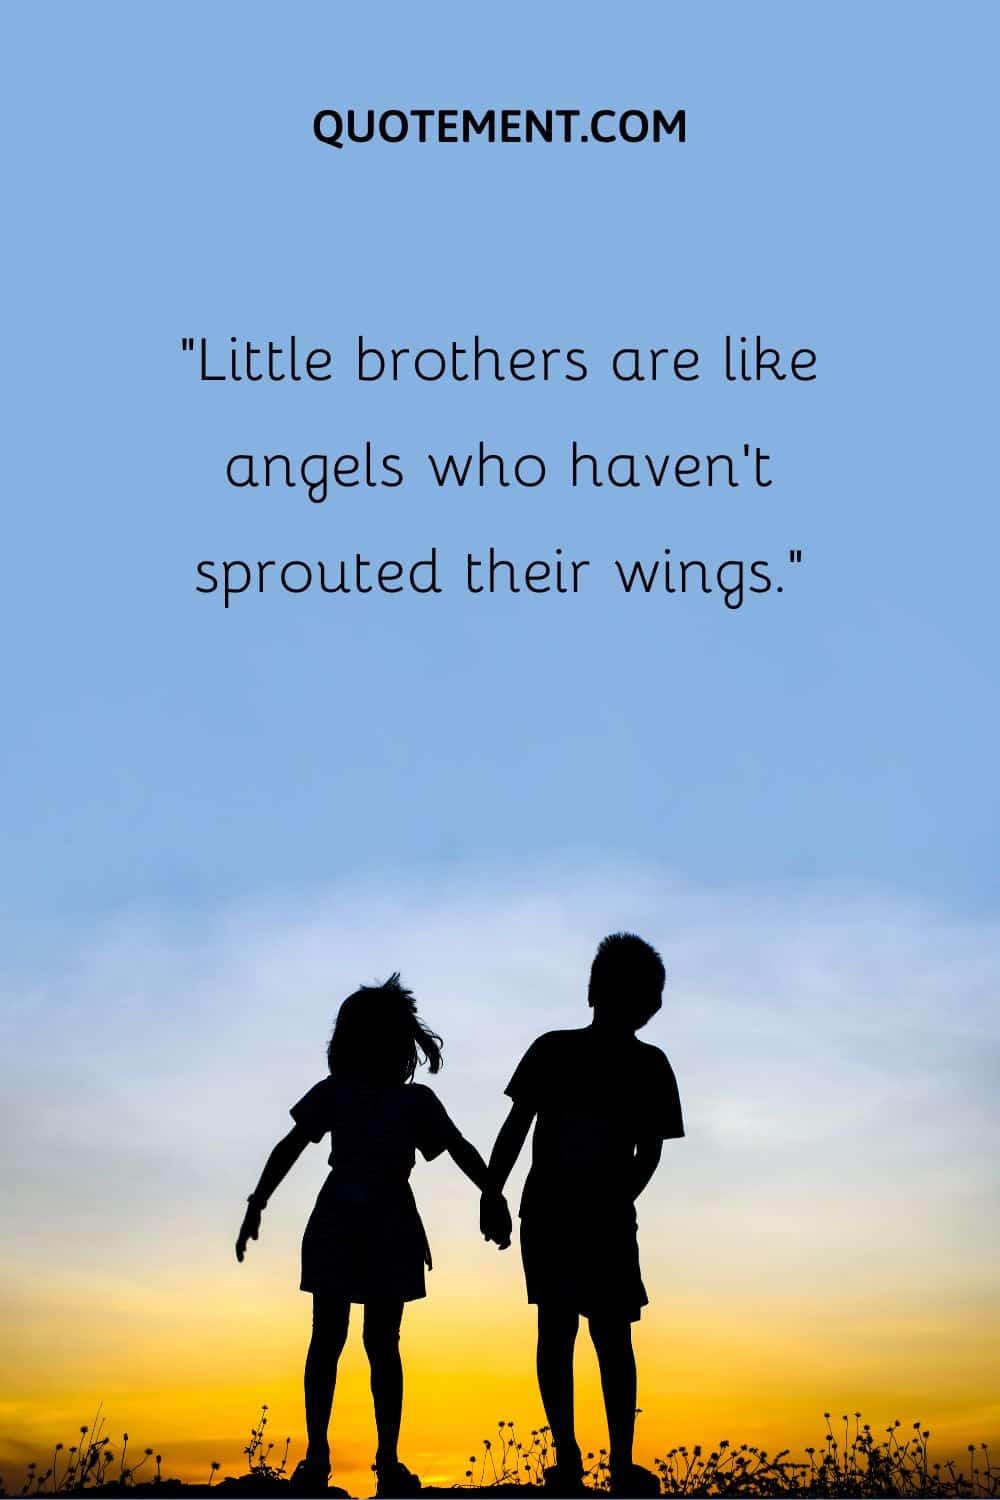 “Little brothers are like angels who haven't sprouted their wings.”